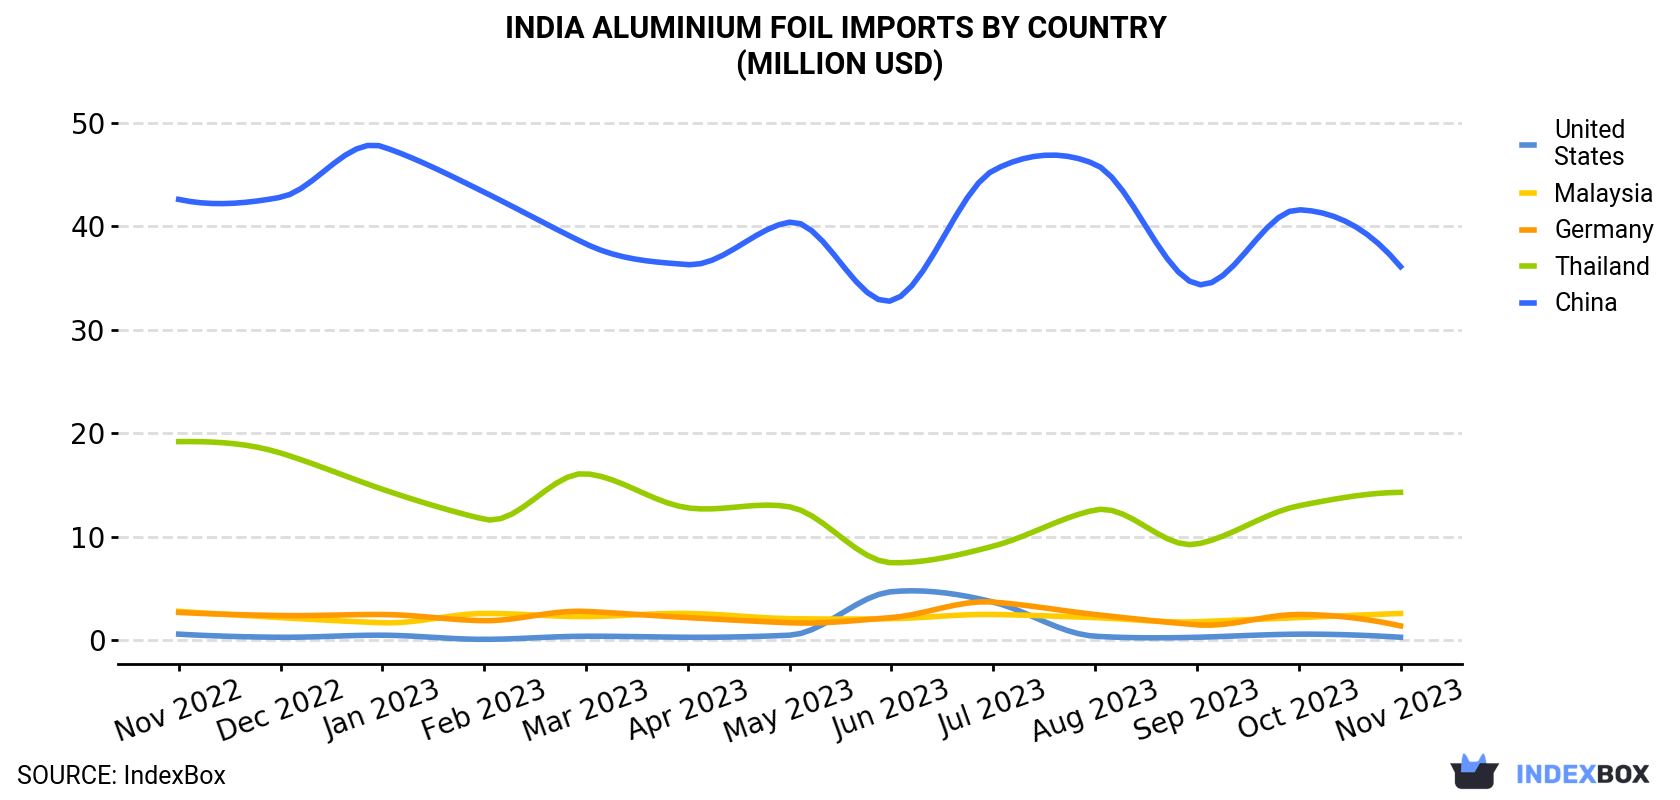 India Aluminium Foil Imports By Country (Million USD)